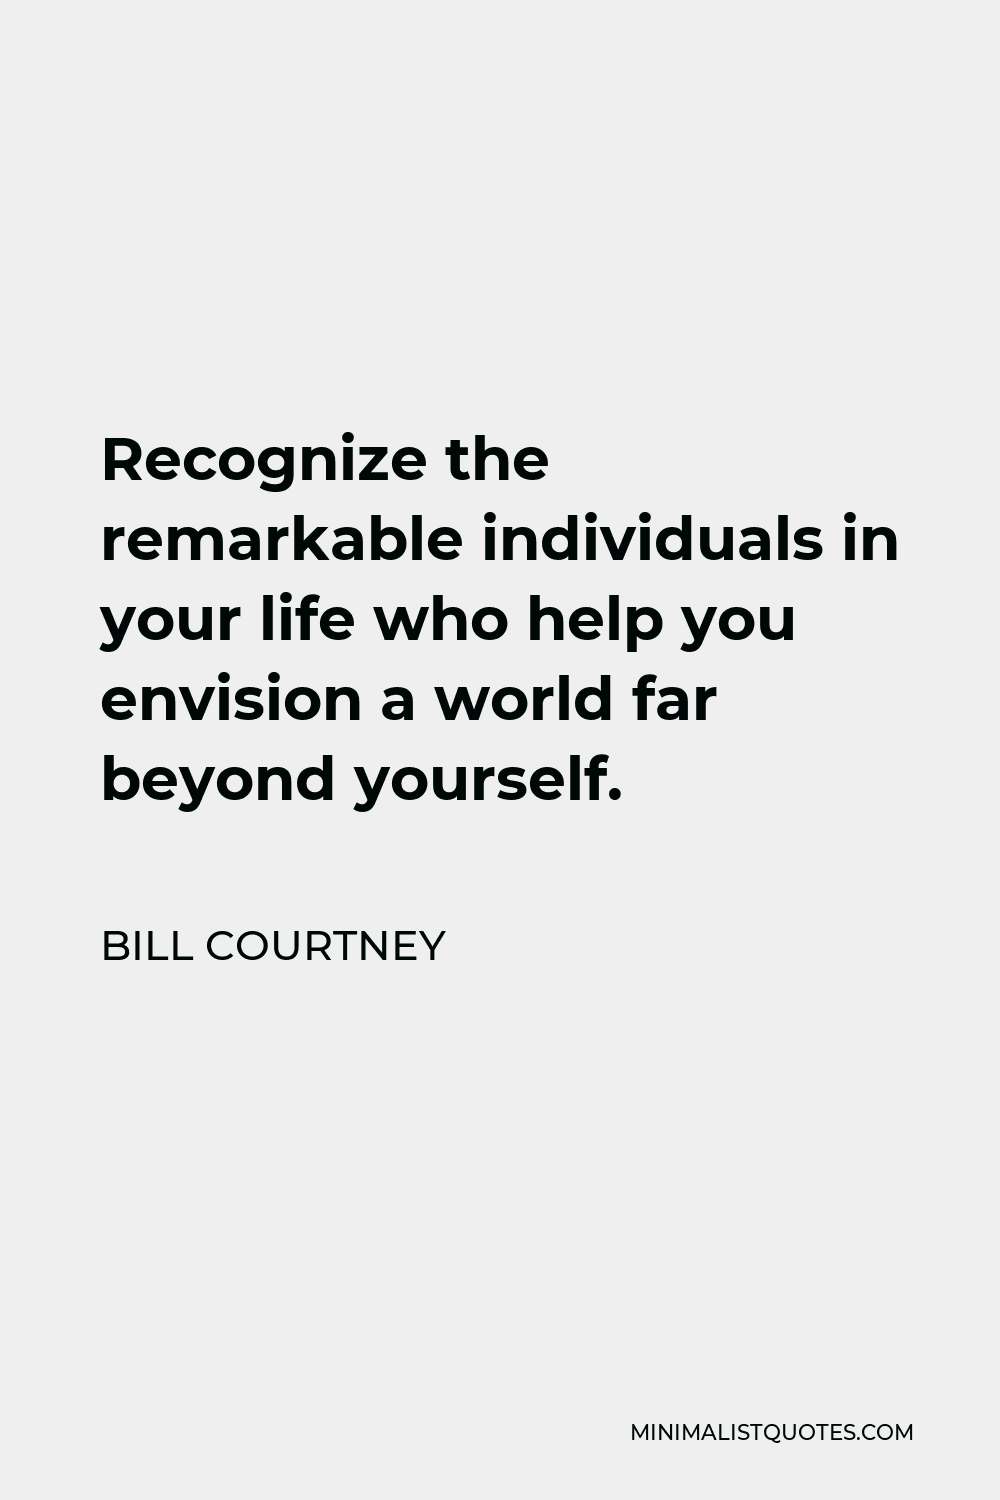 Bill Courtney Quote - Recognize the remarkable individuals in your life who help you envision a world far beyond yourself.